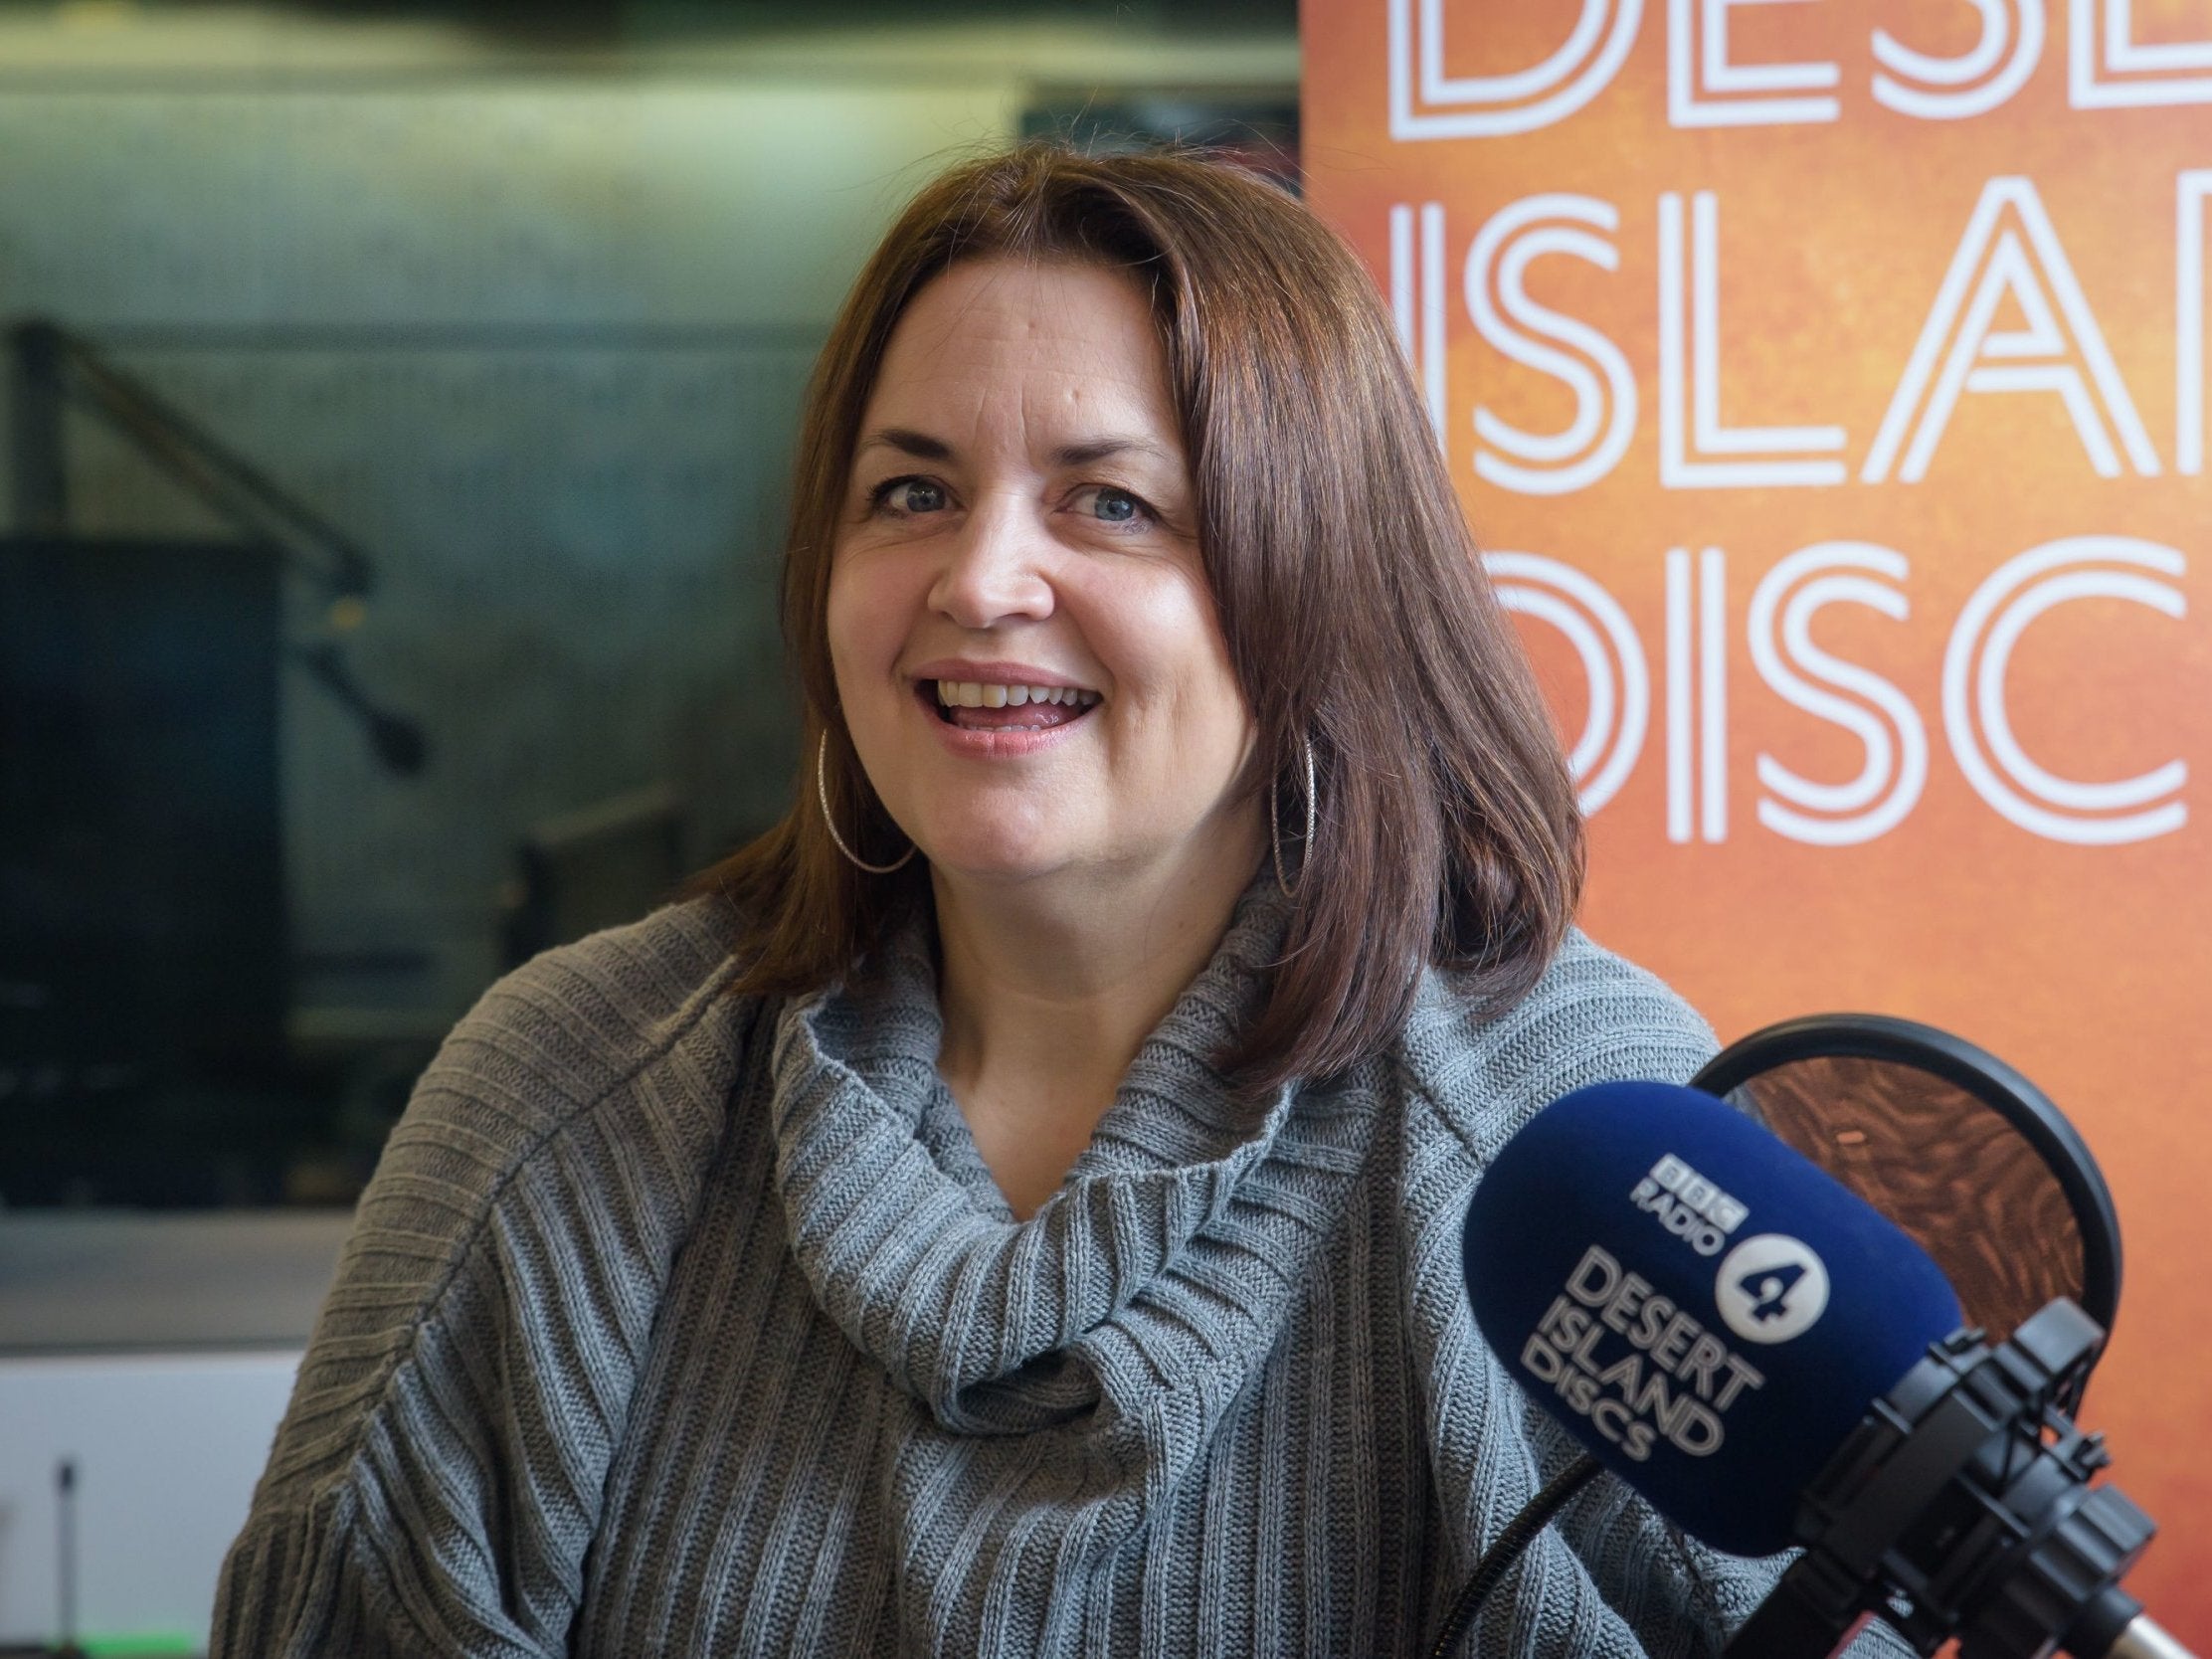 Ruth Jones made an appearance on the latest episode of Desert Island Discs